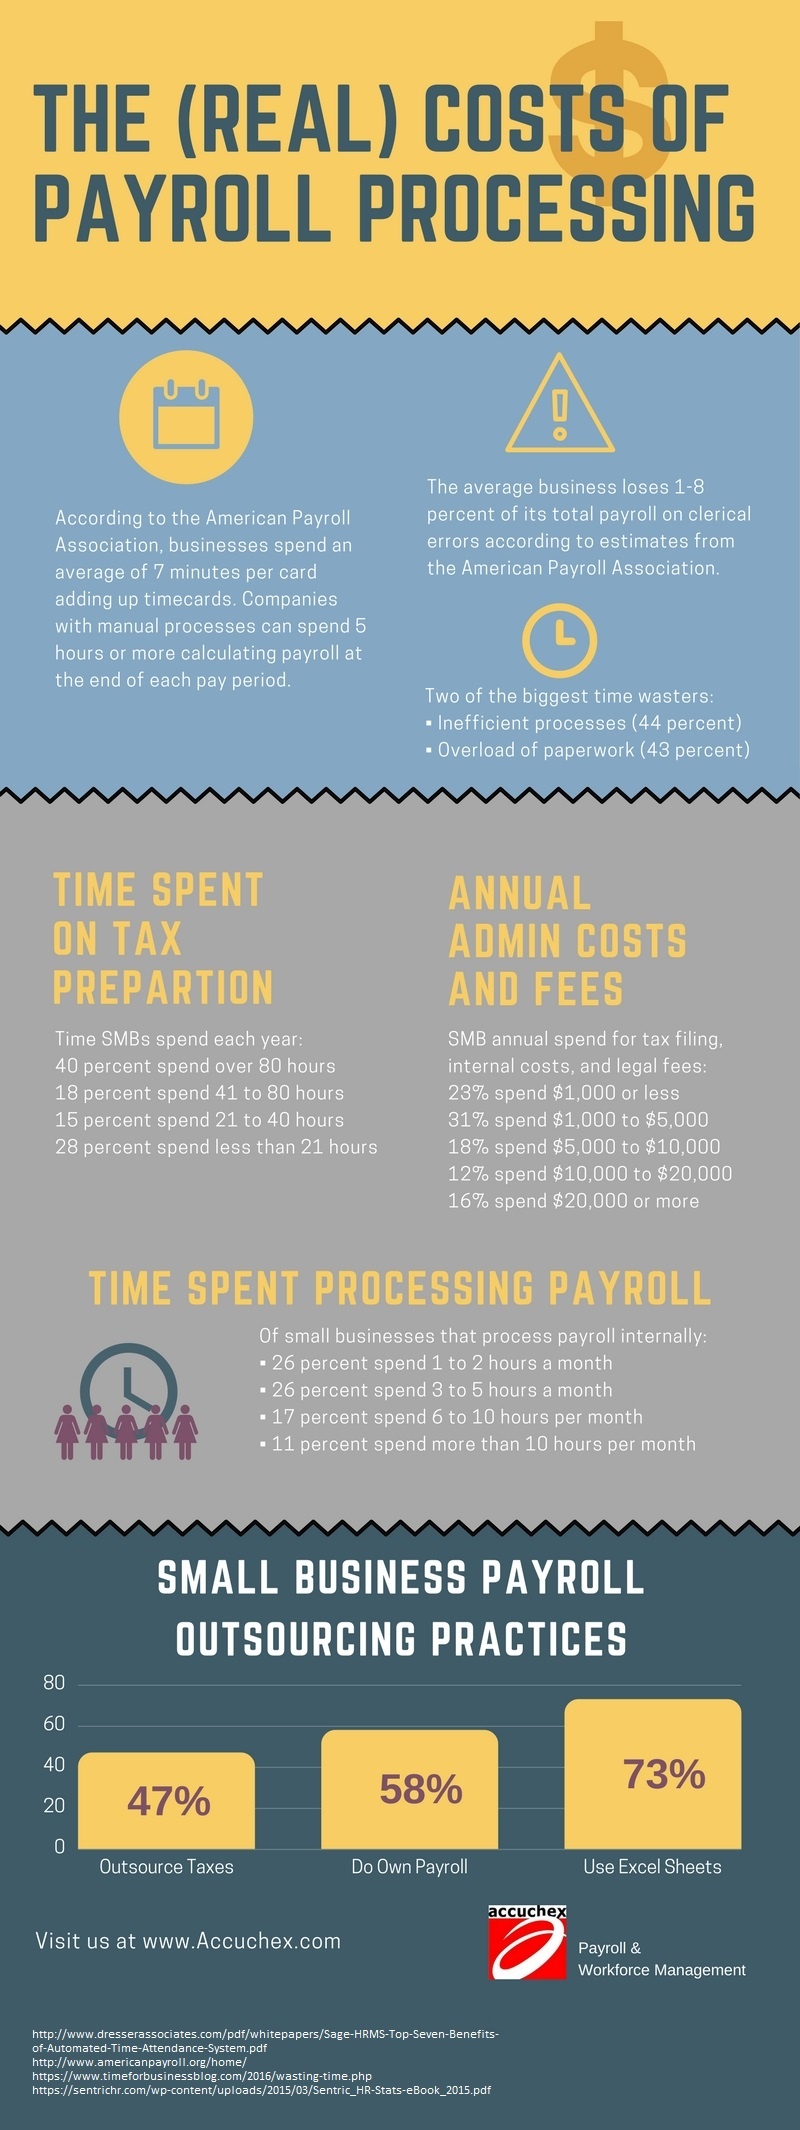 the-real-costs-of-payroll-processing.jpg